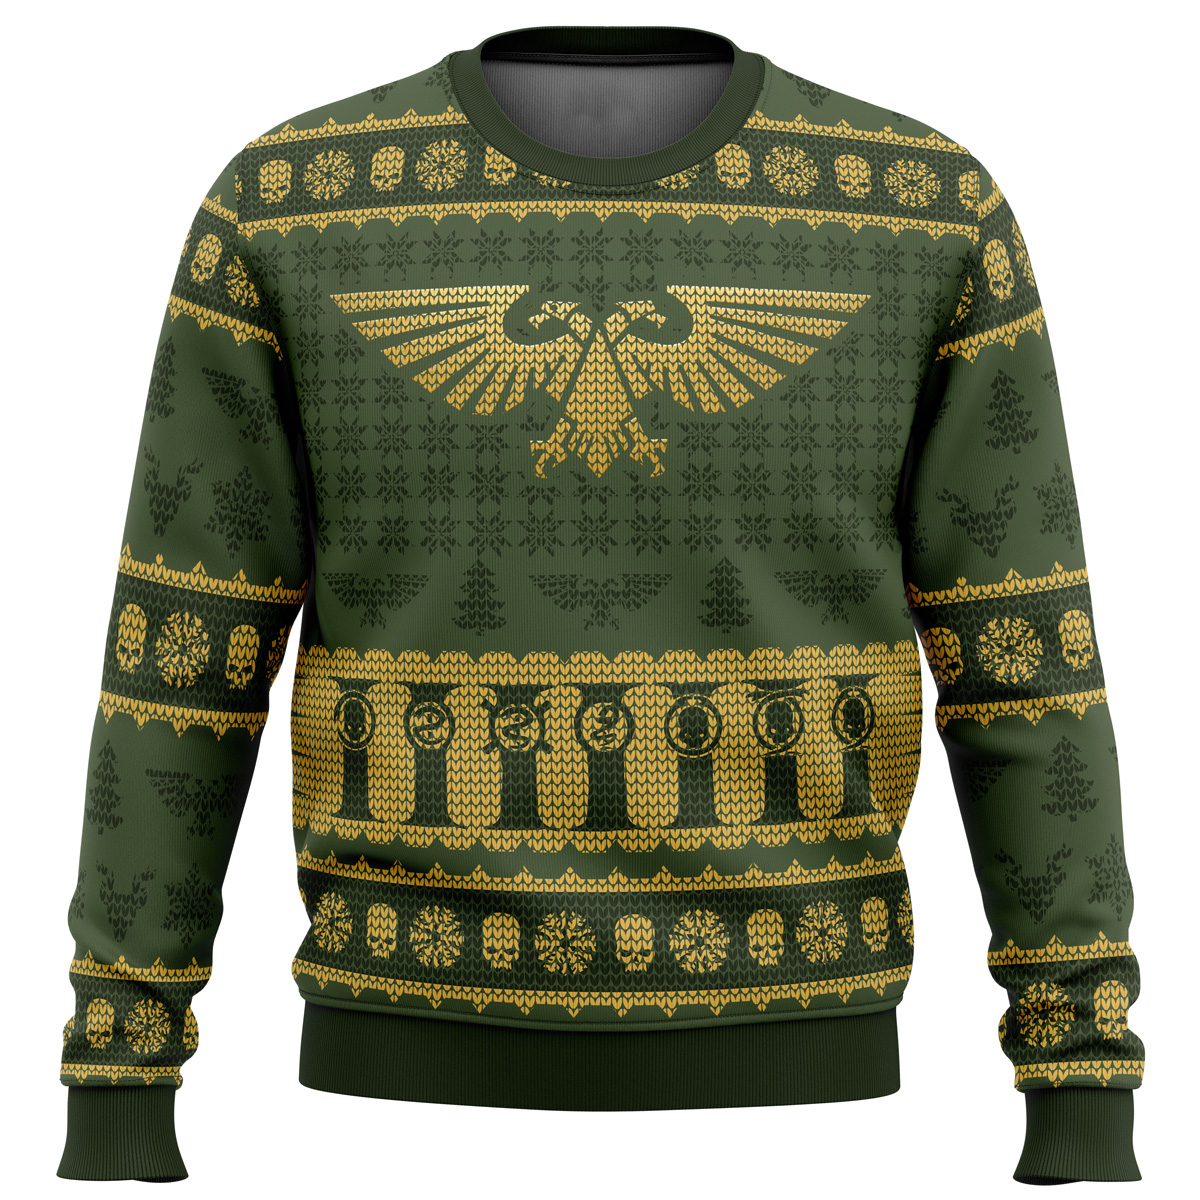 Warhammer 40k Imperium Ugly Christmas Sweater